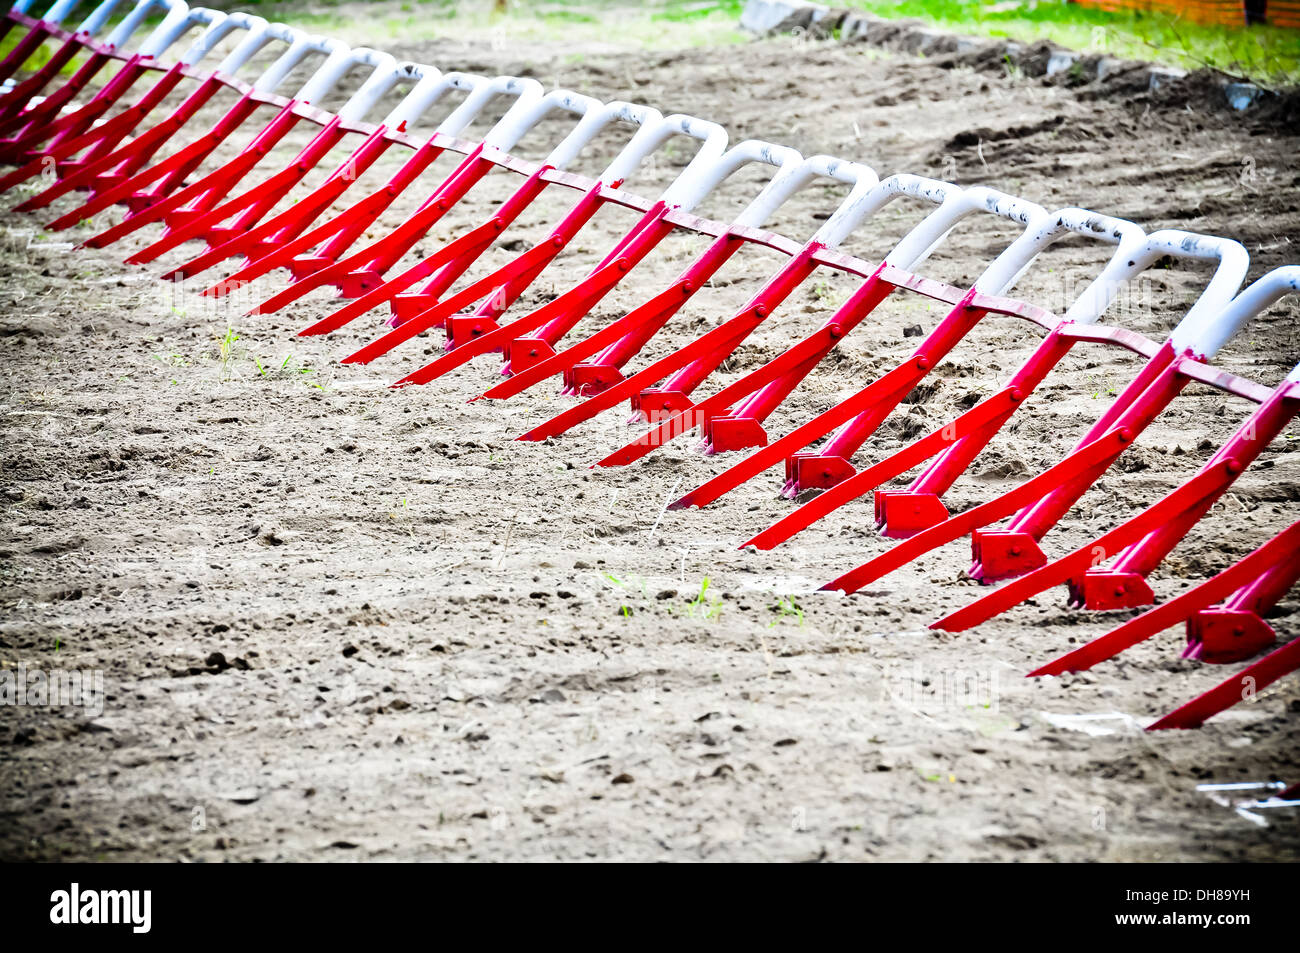 Motocross Race Start Line High Resolution Stock Photography And Images Alamy